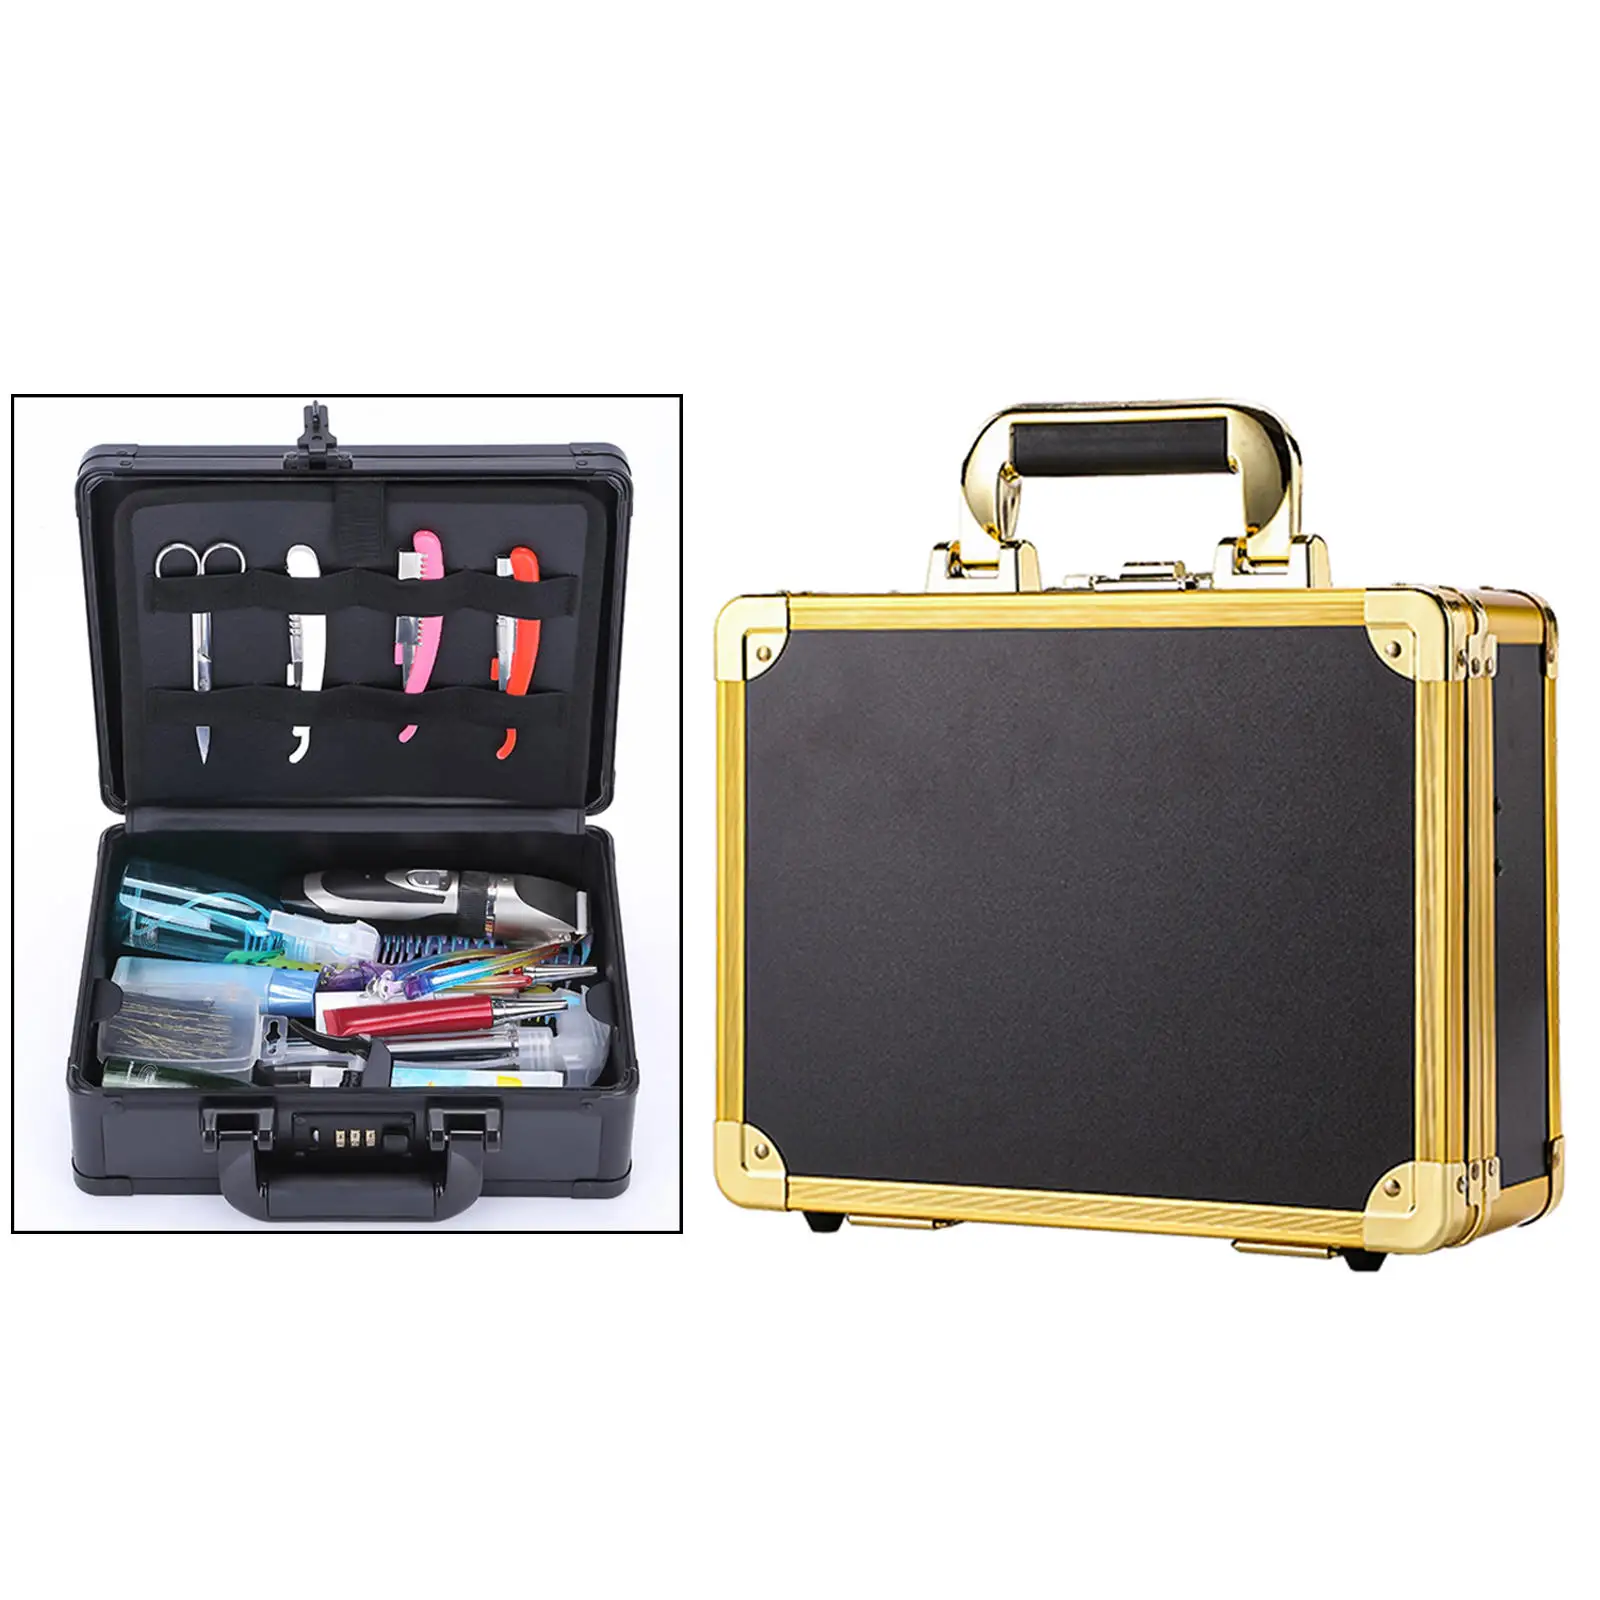 Portable Barber Stylist Travel Metal Case Hair Styling Scissors Combs Tool Box Storage/ Display